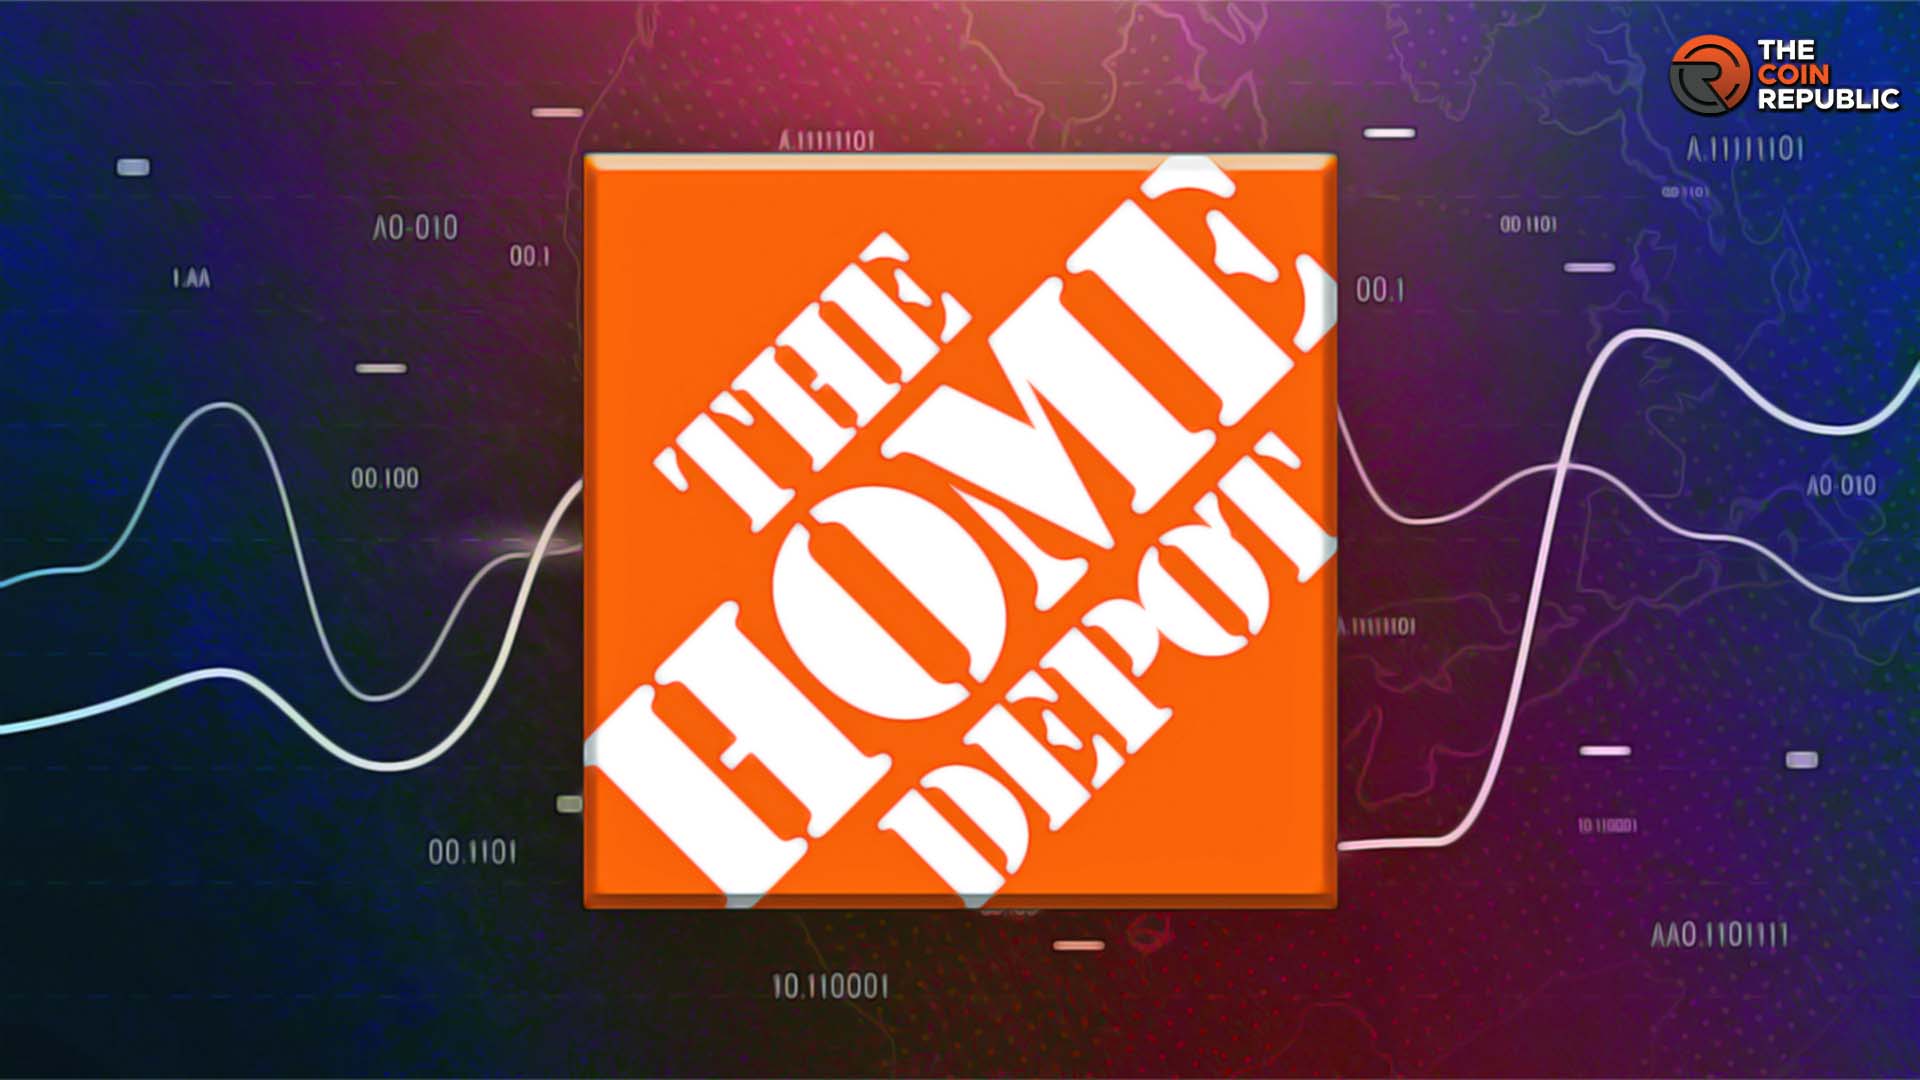 Home Depot Inc. (NYSE: HD): Will HD Stock Price Rebound?